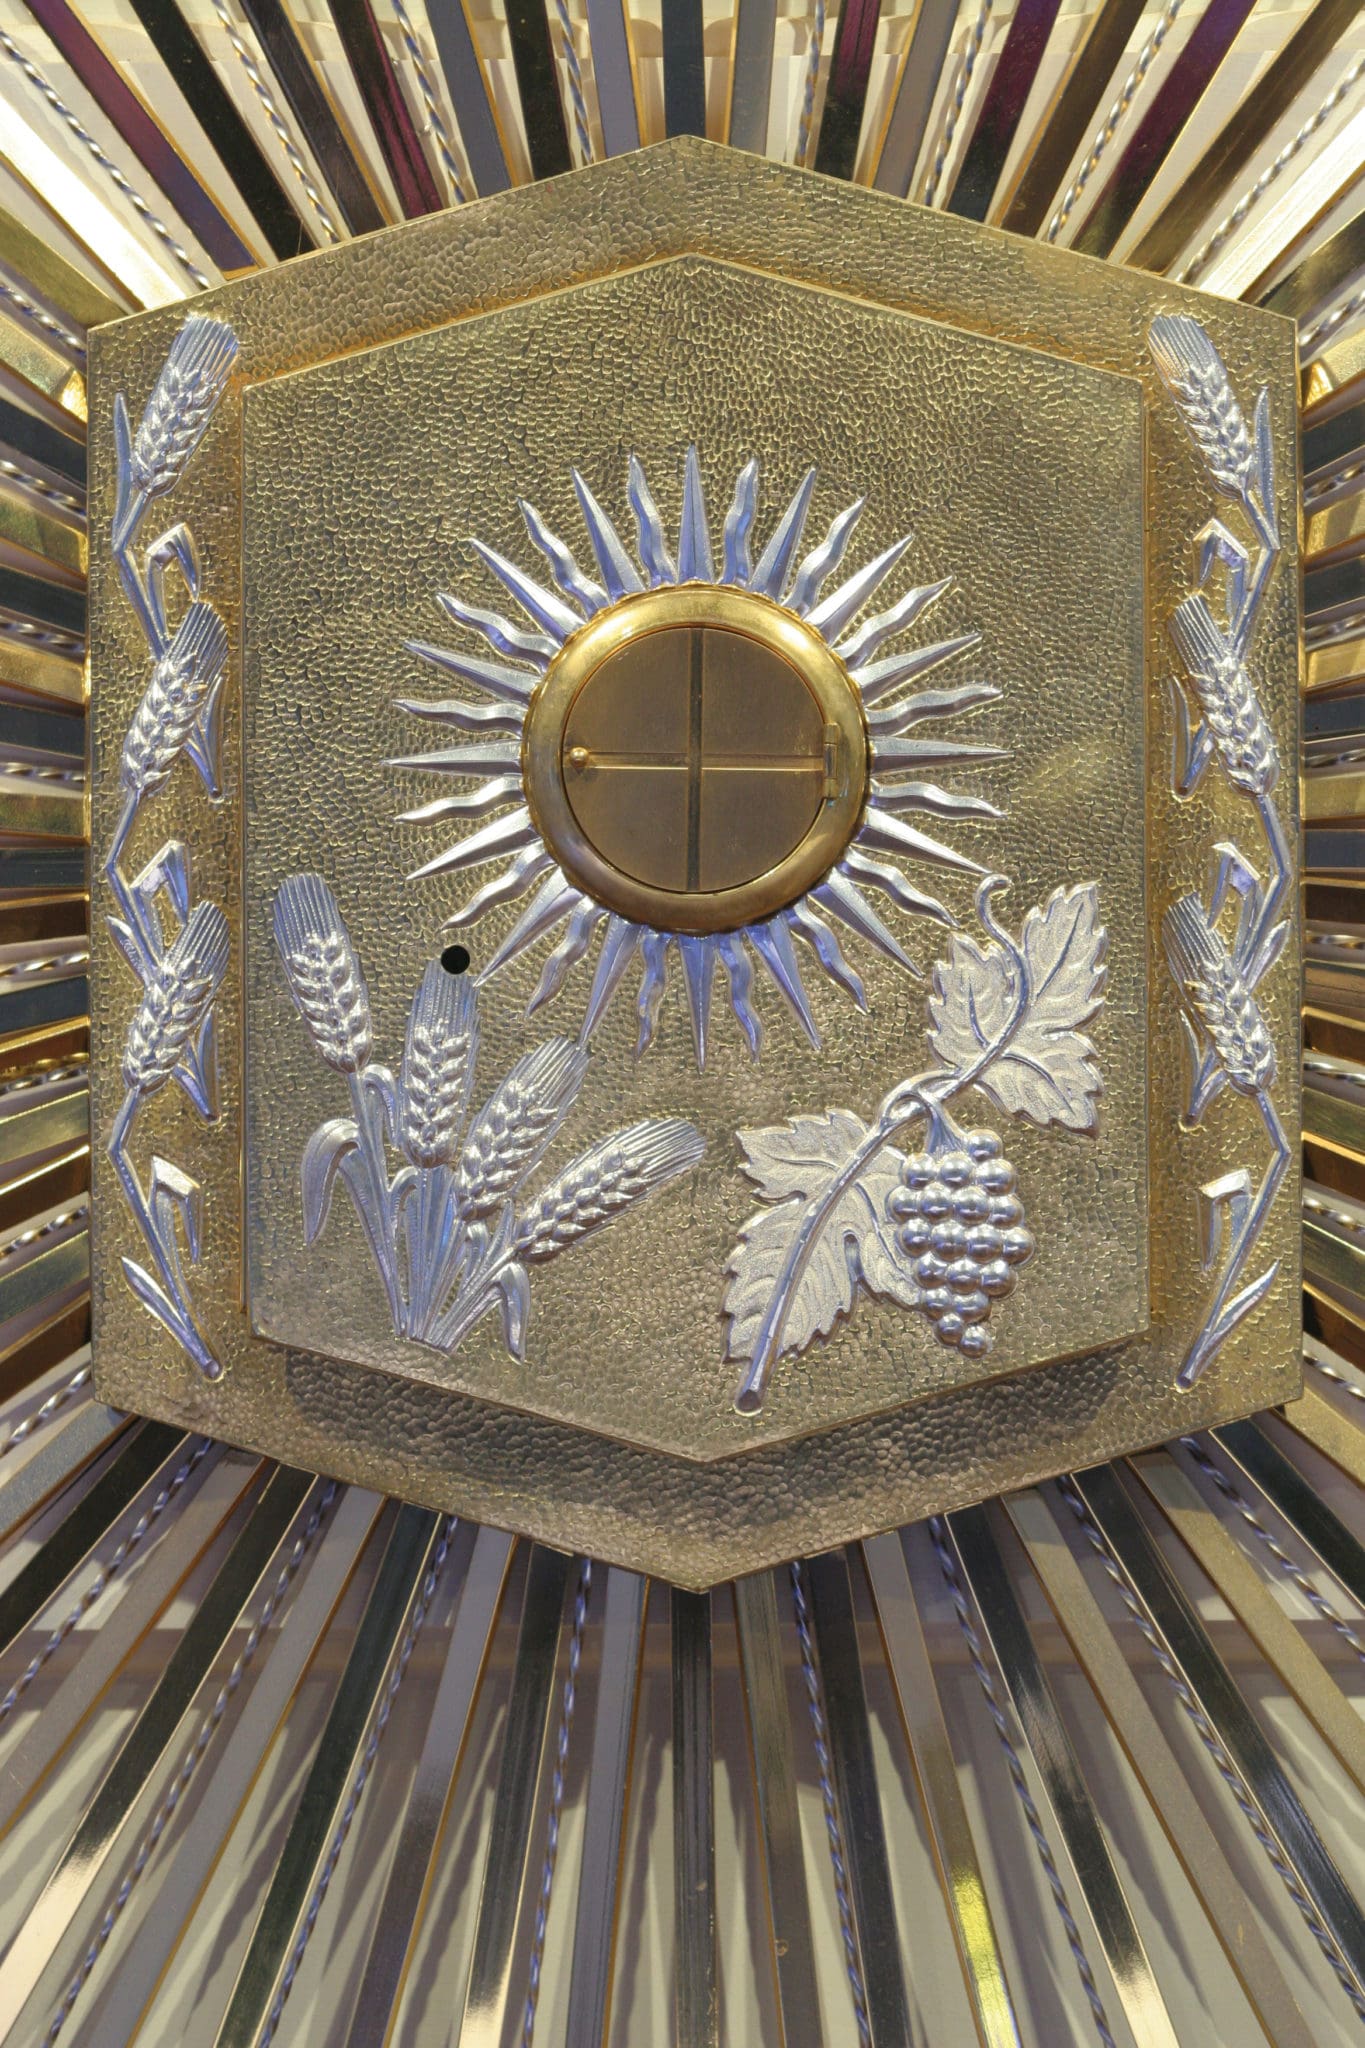 Details of the tabernacle of St. Paul the Apostle Church